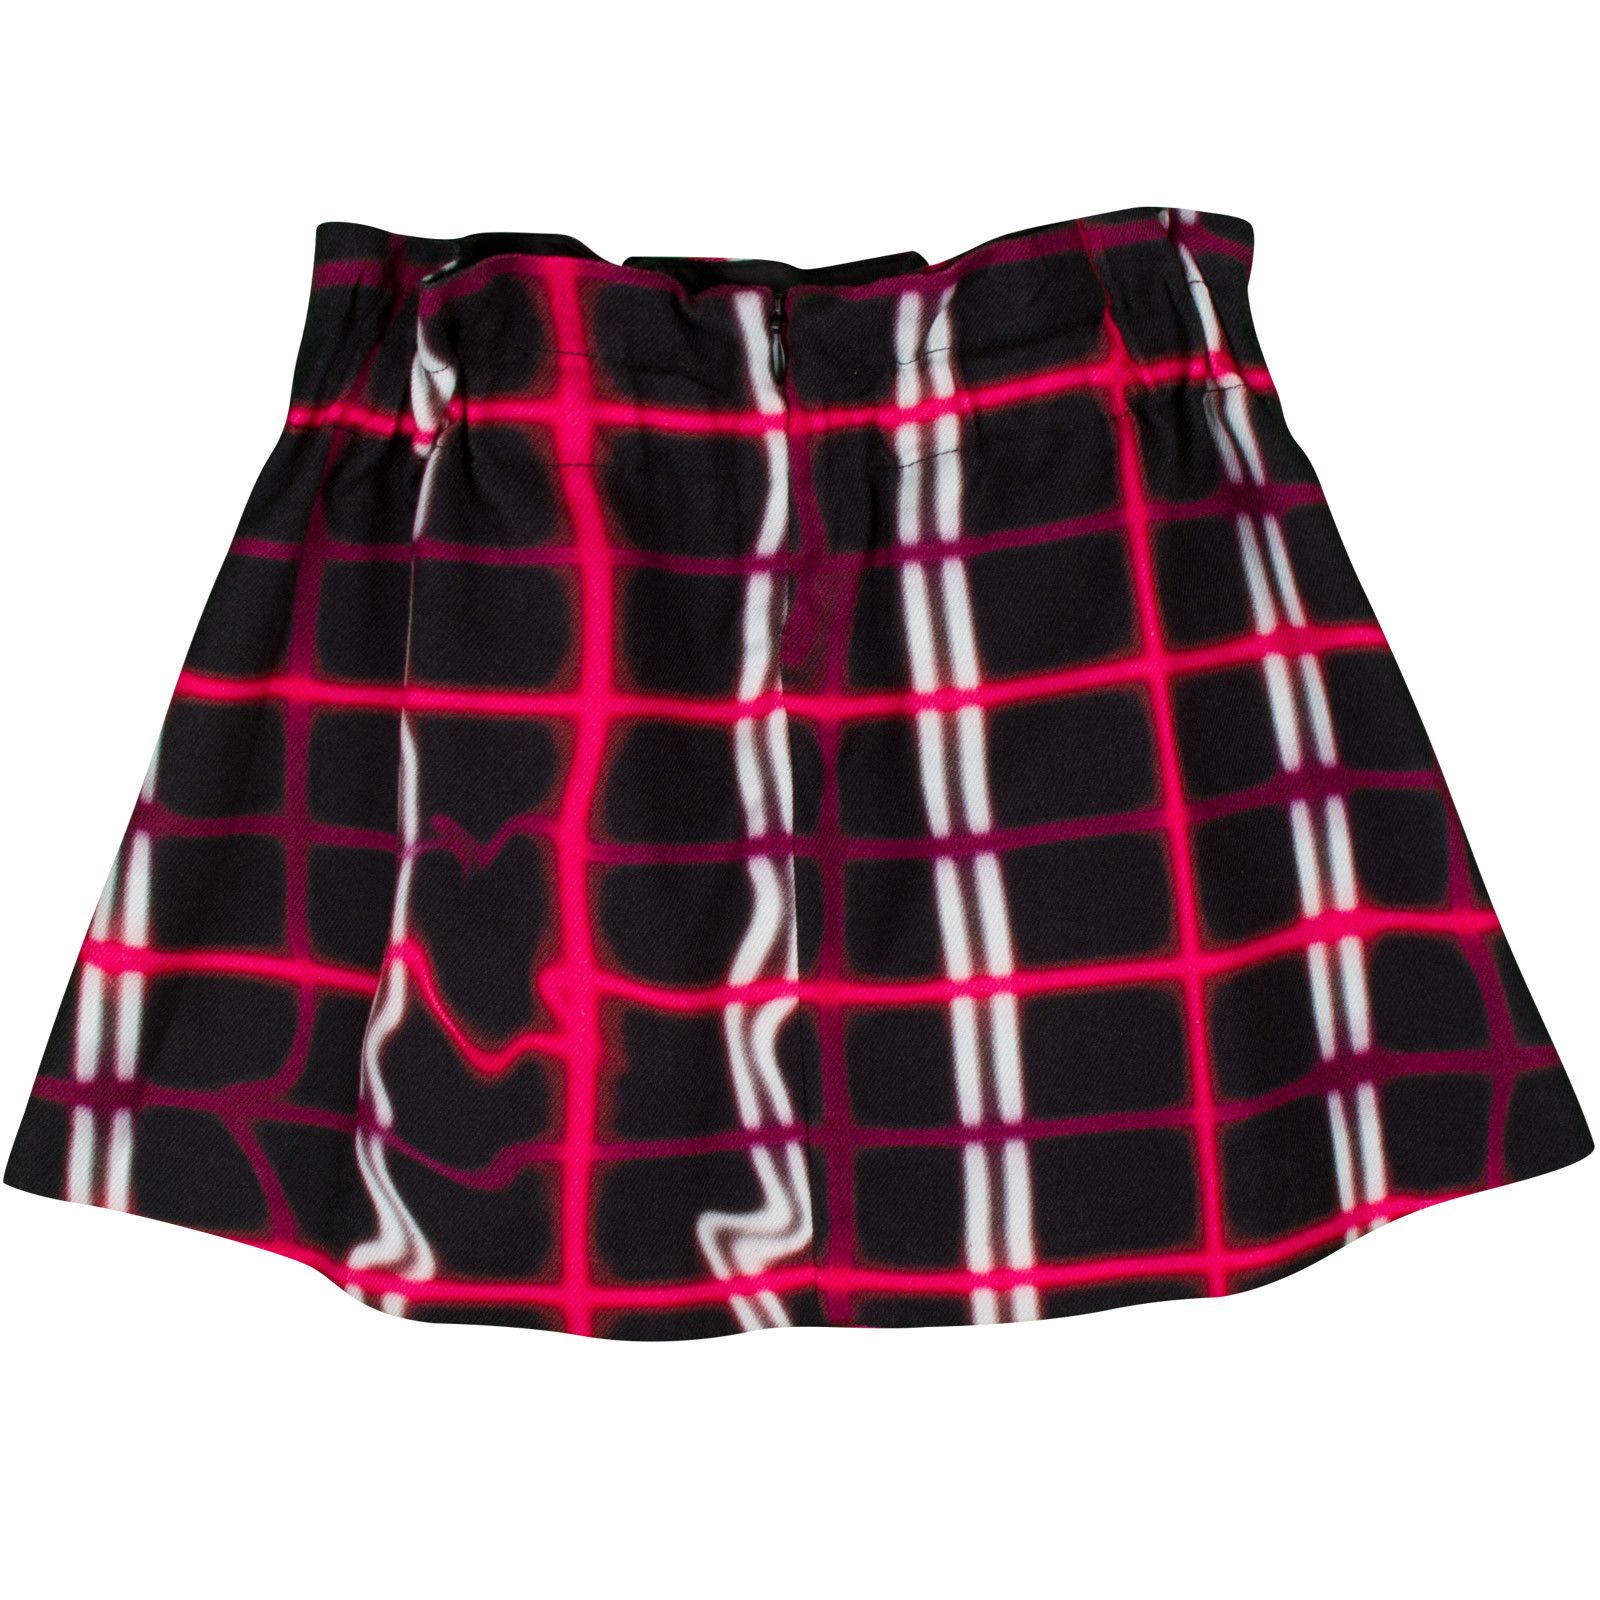 Girls Black Skirt With Red&White Check Printed - CÉMAROSE | Children's Fashion Store - 2